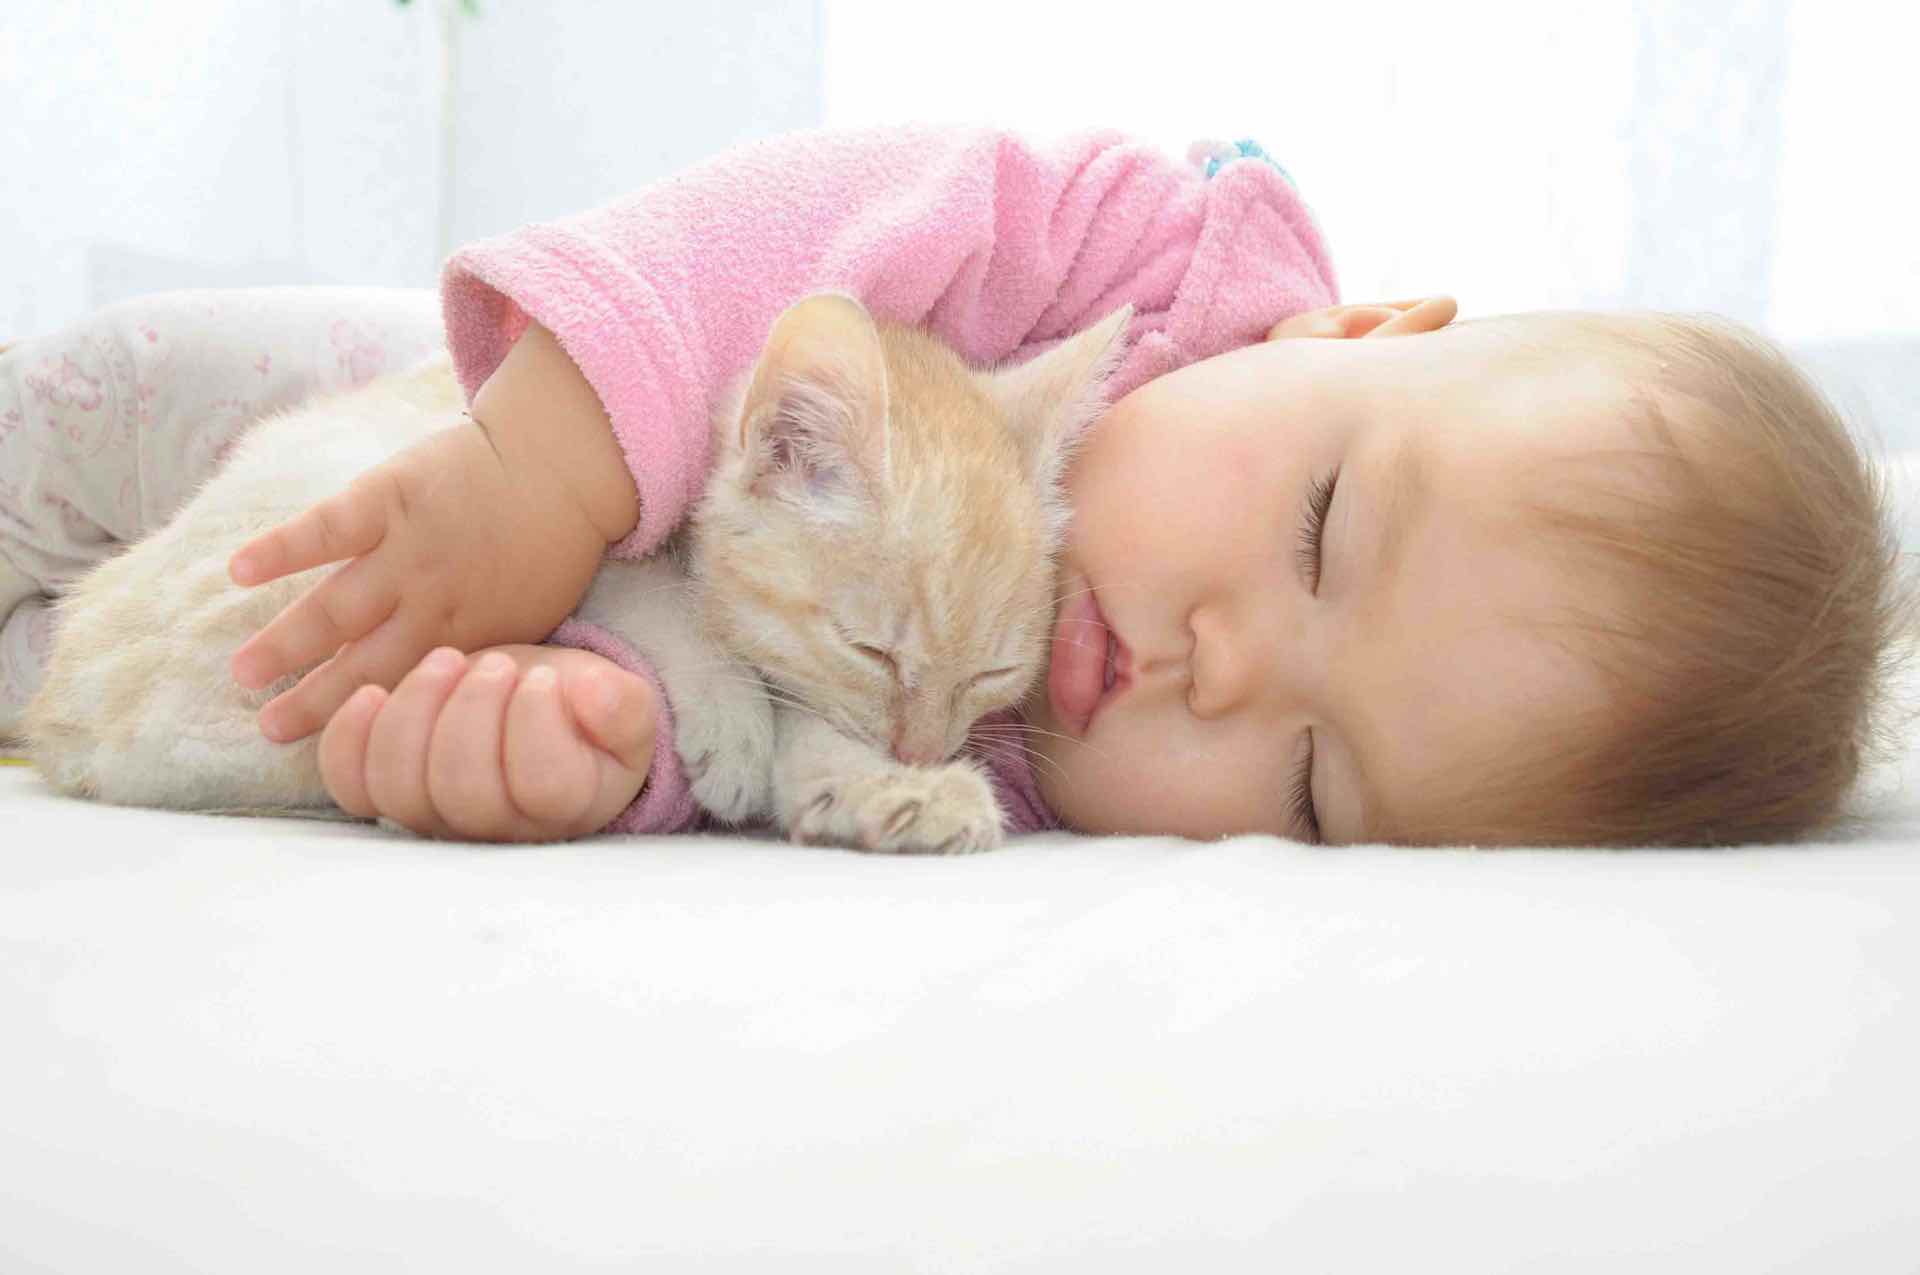 These videos of babies with kittens 